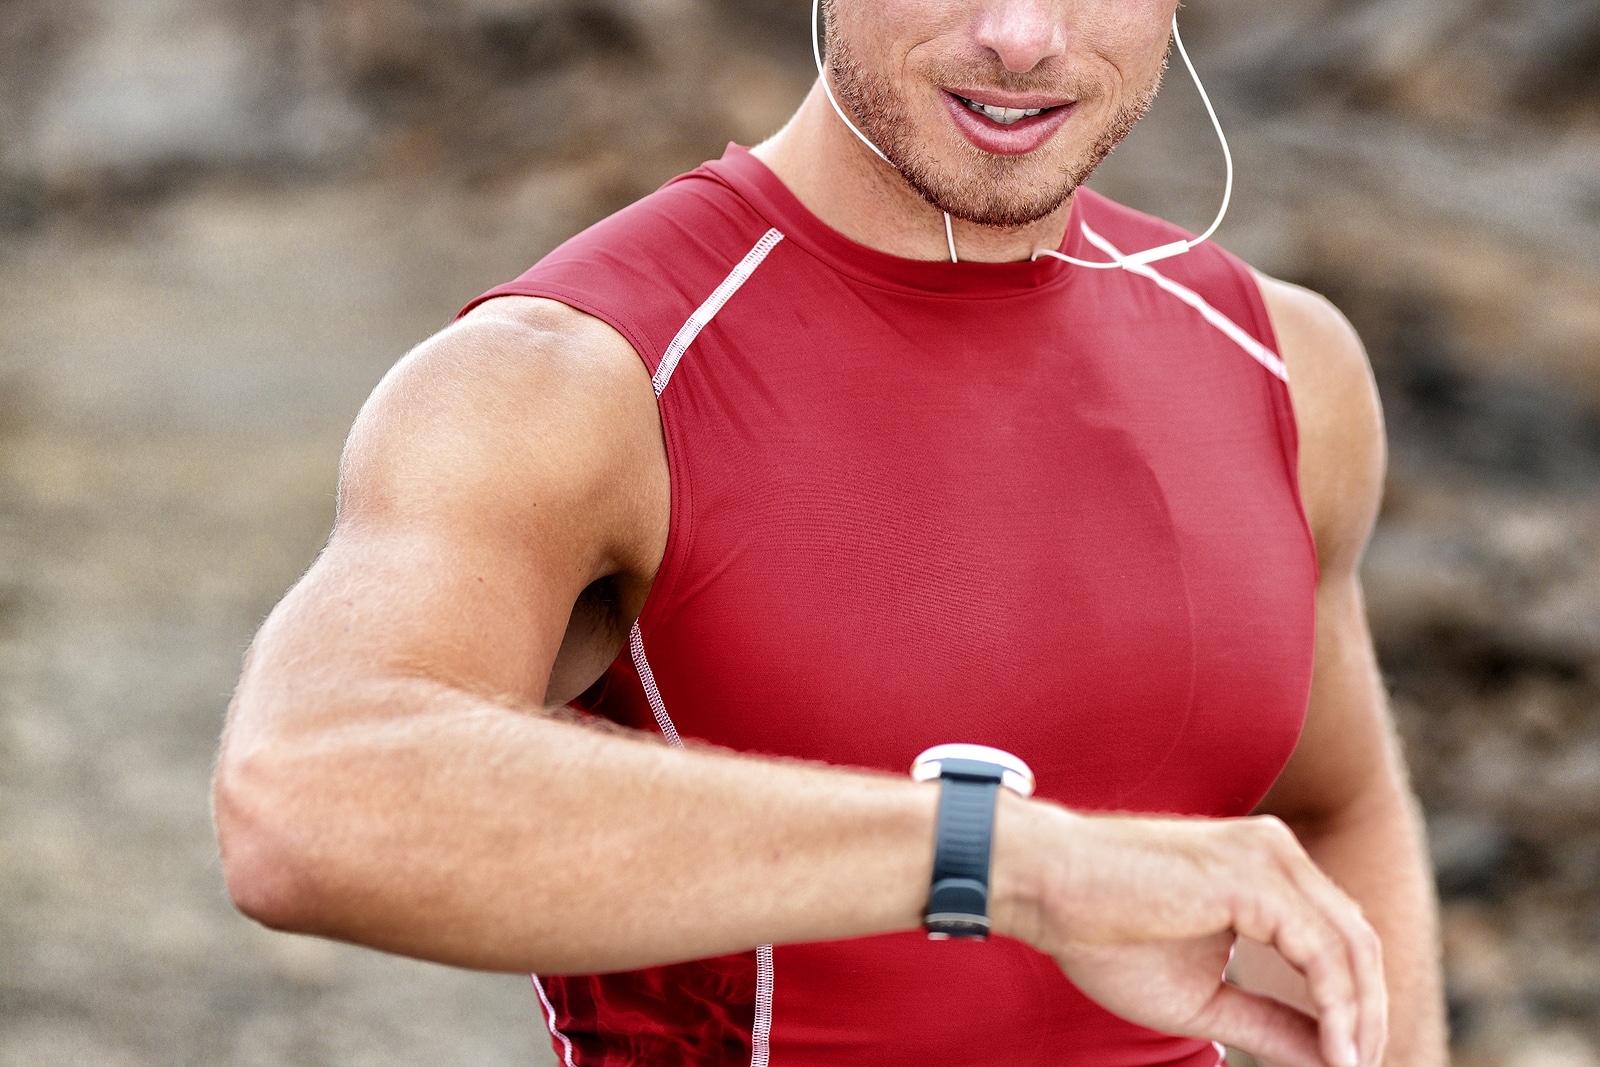 Smartwatch man athlete runner checking his wearable device tech